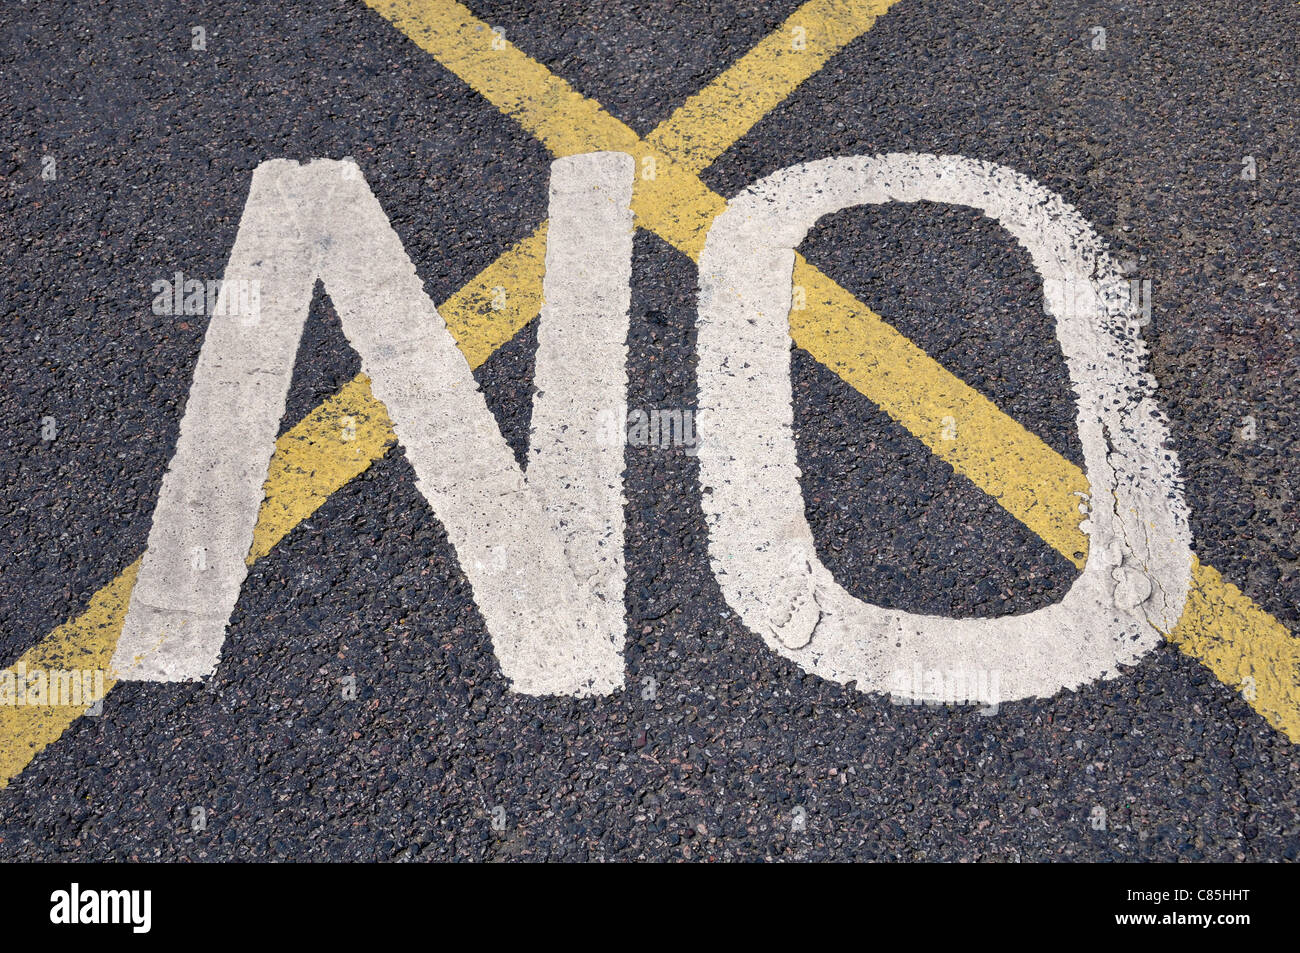 No Text on Road Stock Photo